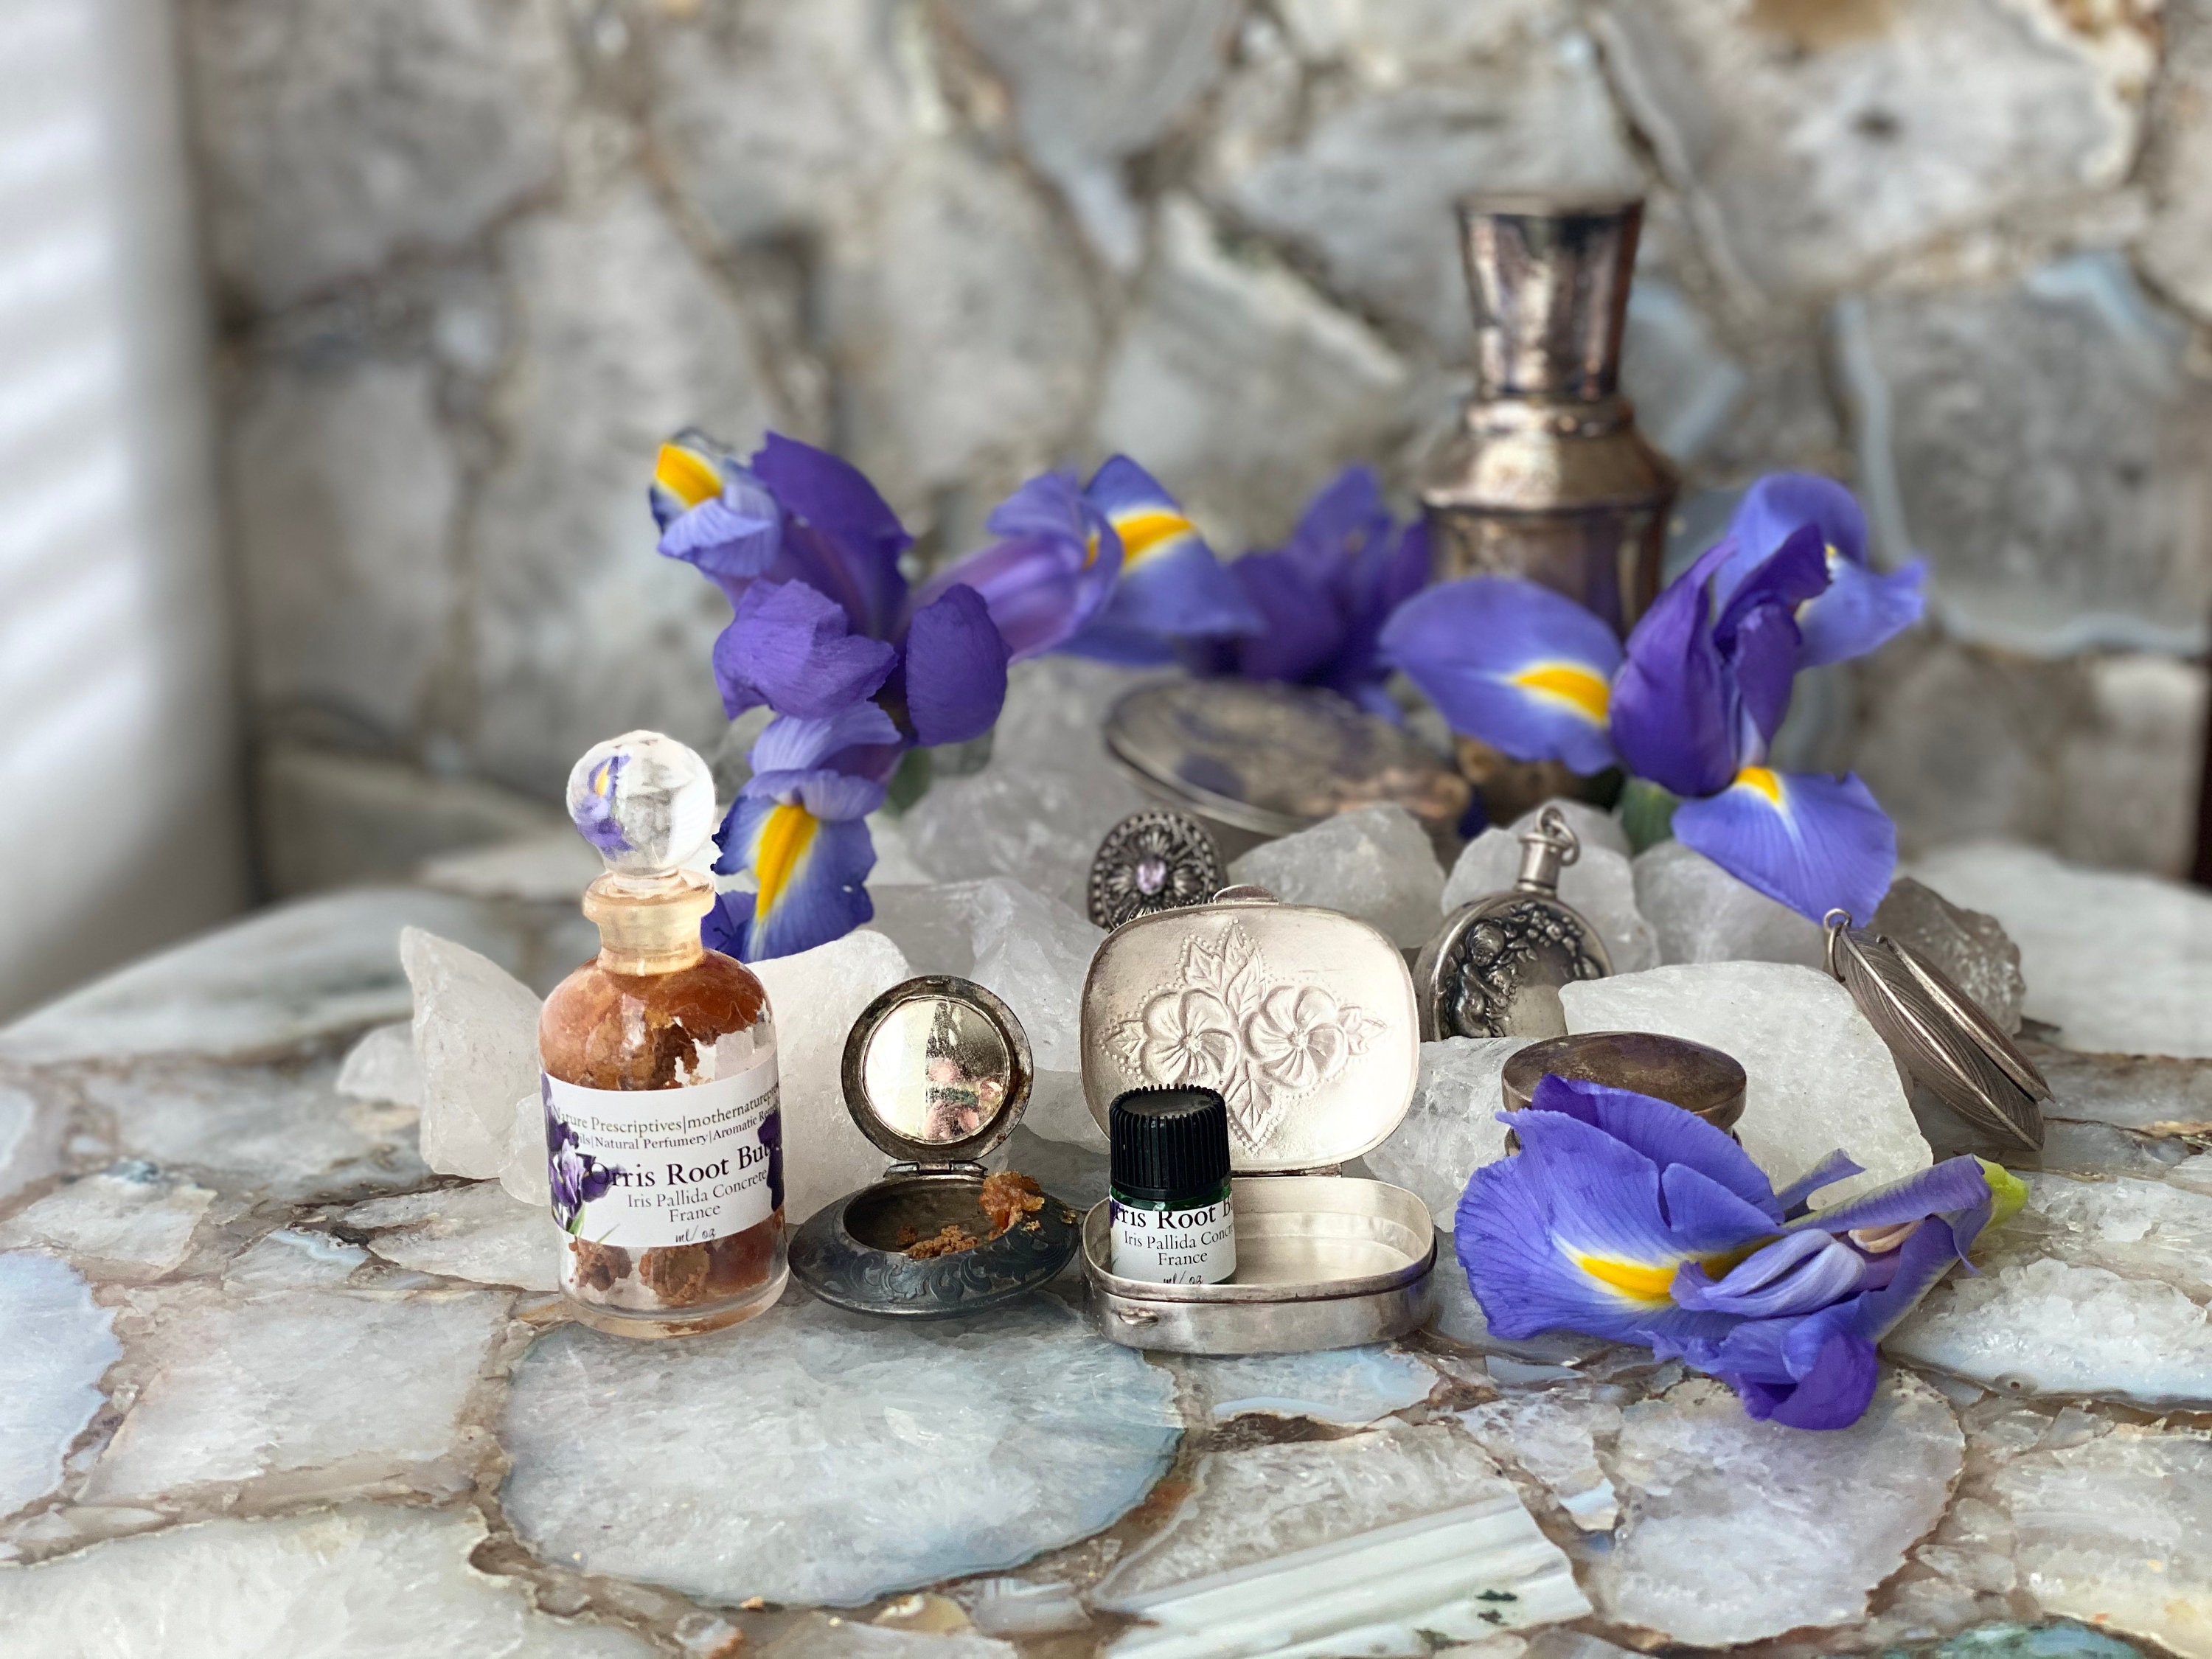 Iris Root Perfume Note Details - Why Orris Is So Expensive in Fragrance